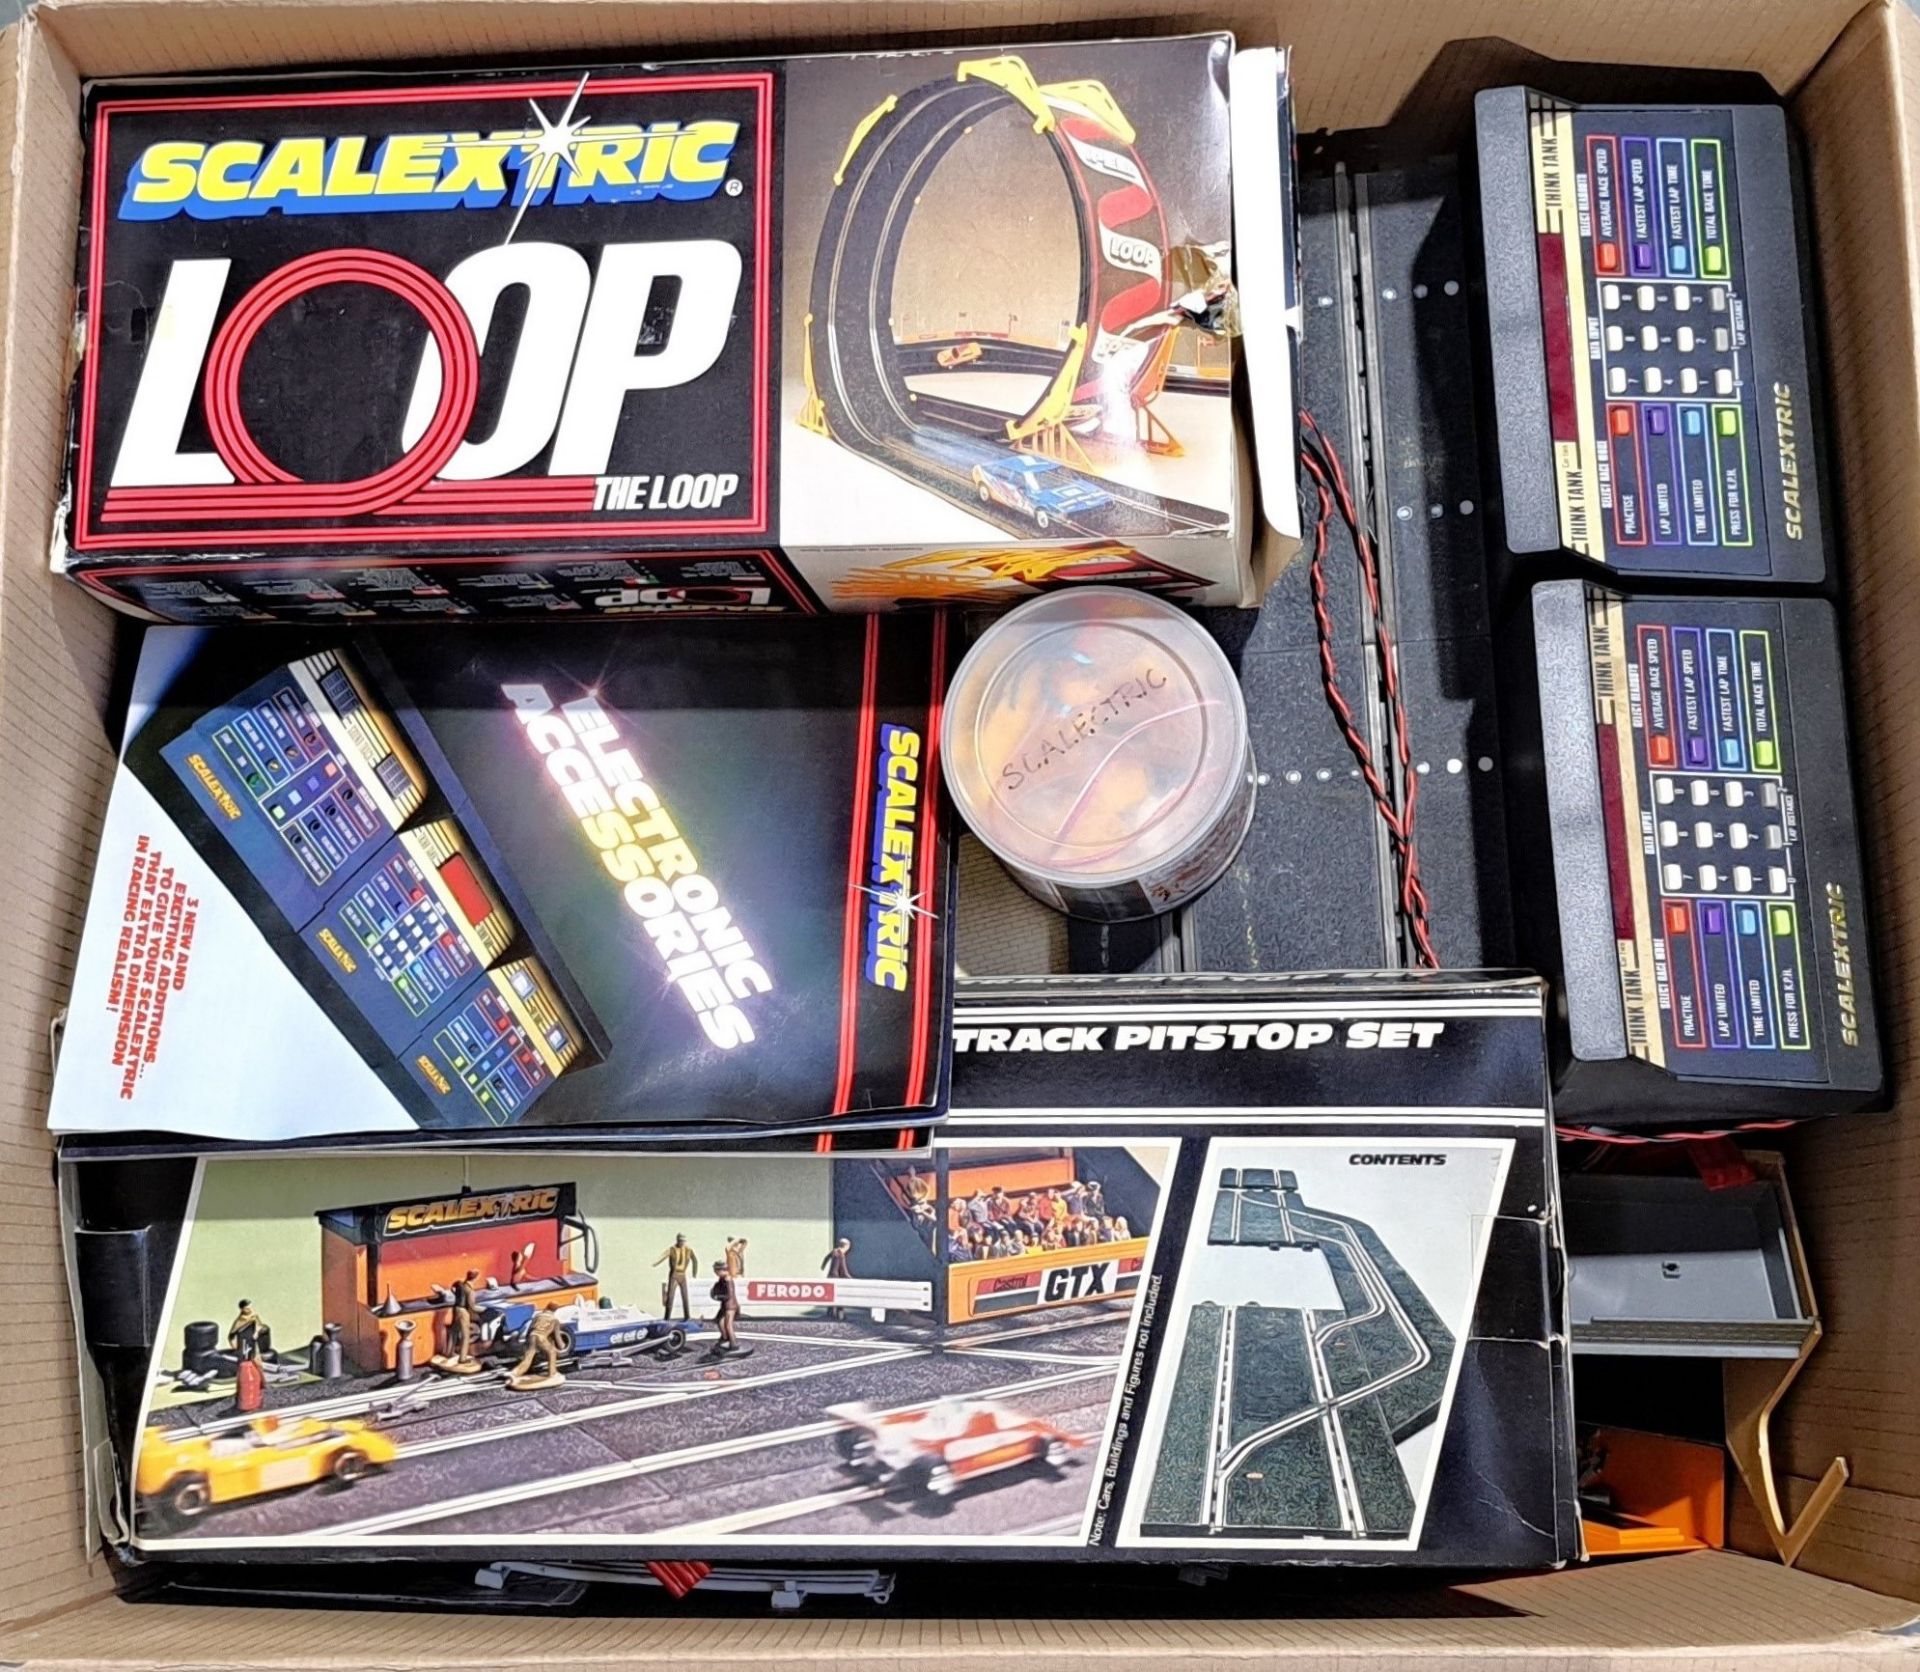 Scalextric accessories, controllers, track & similar, a large boxed & unboxed group - Bild 2 aus 2